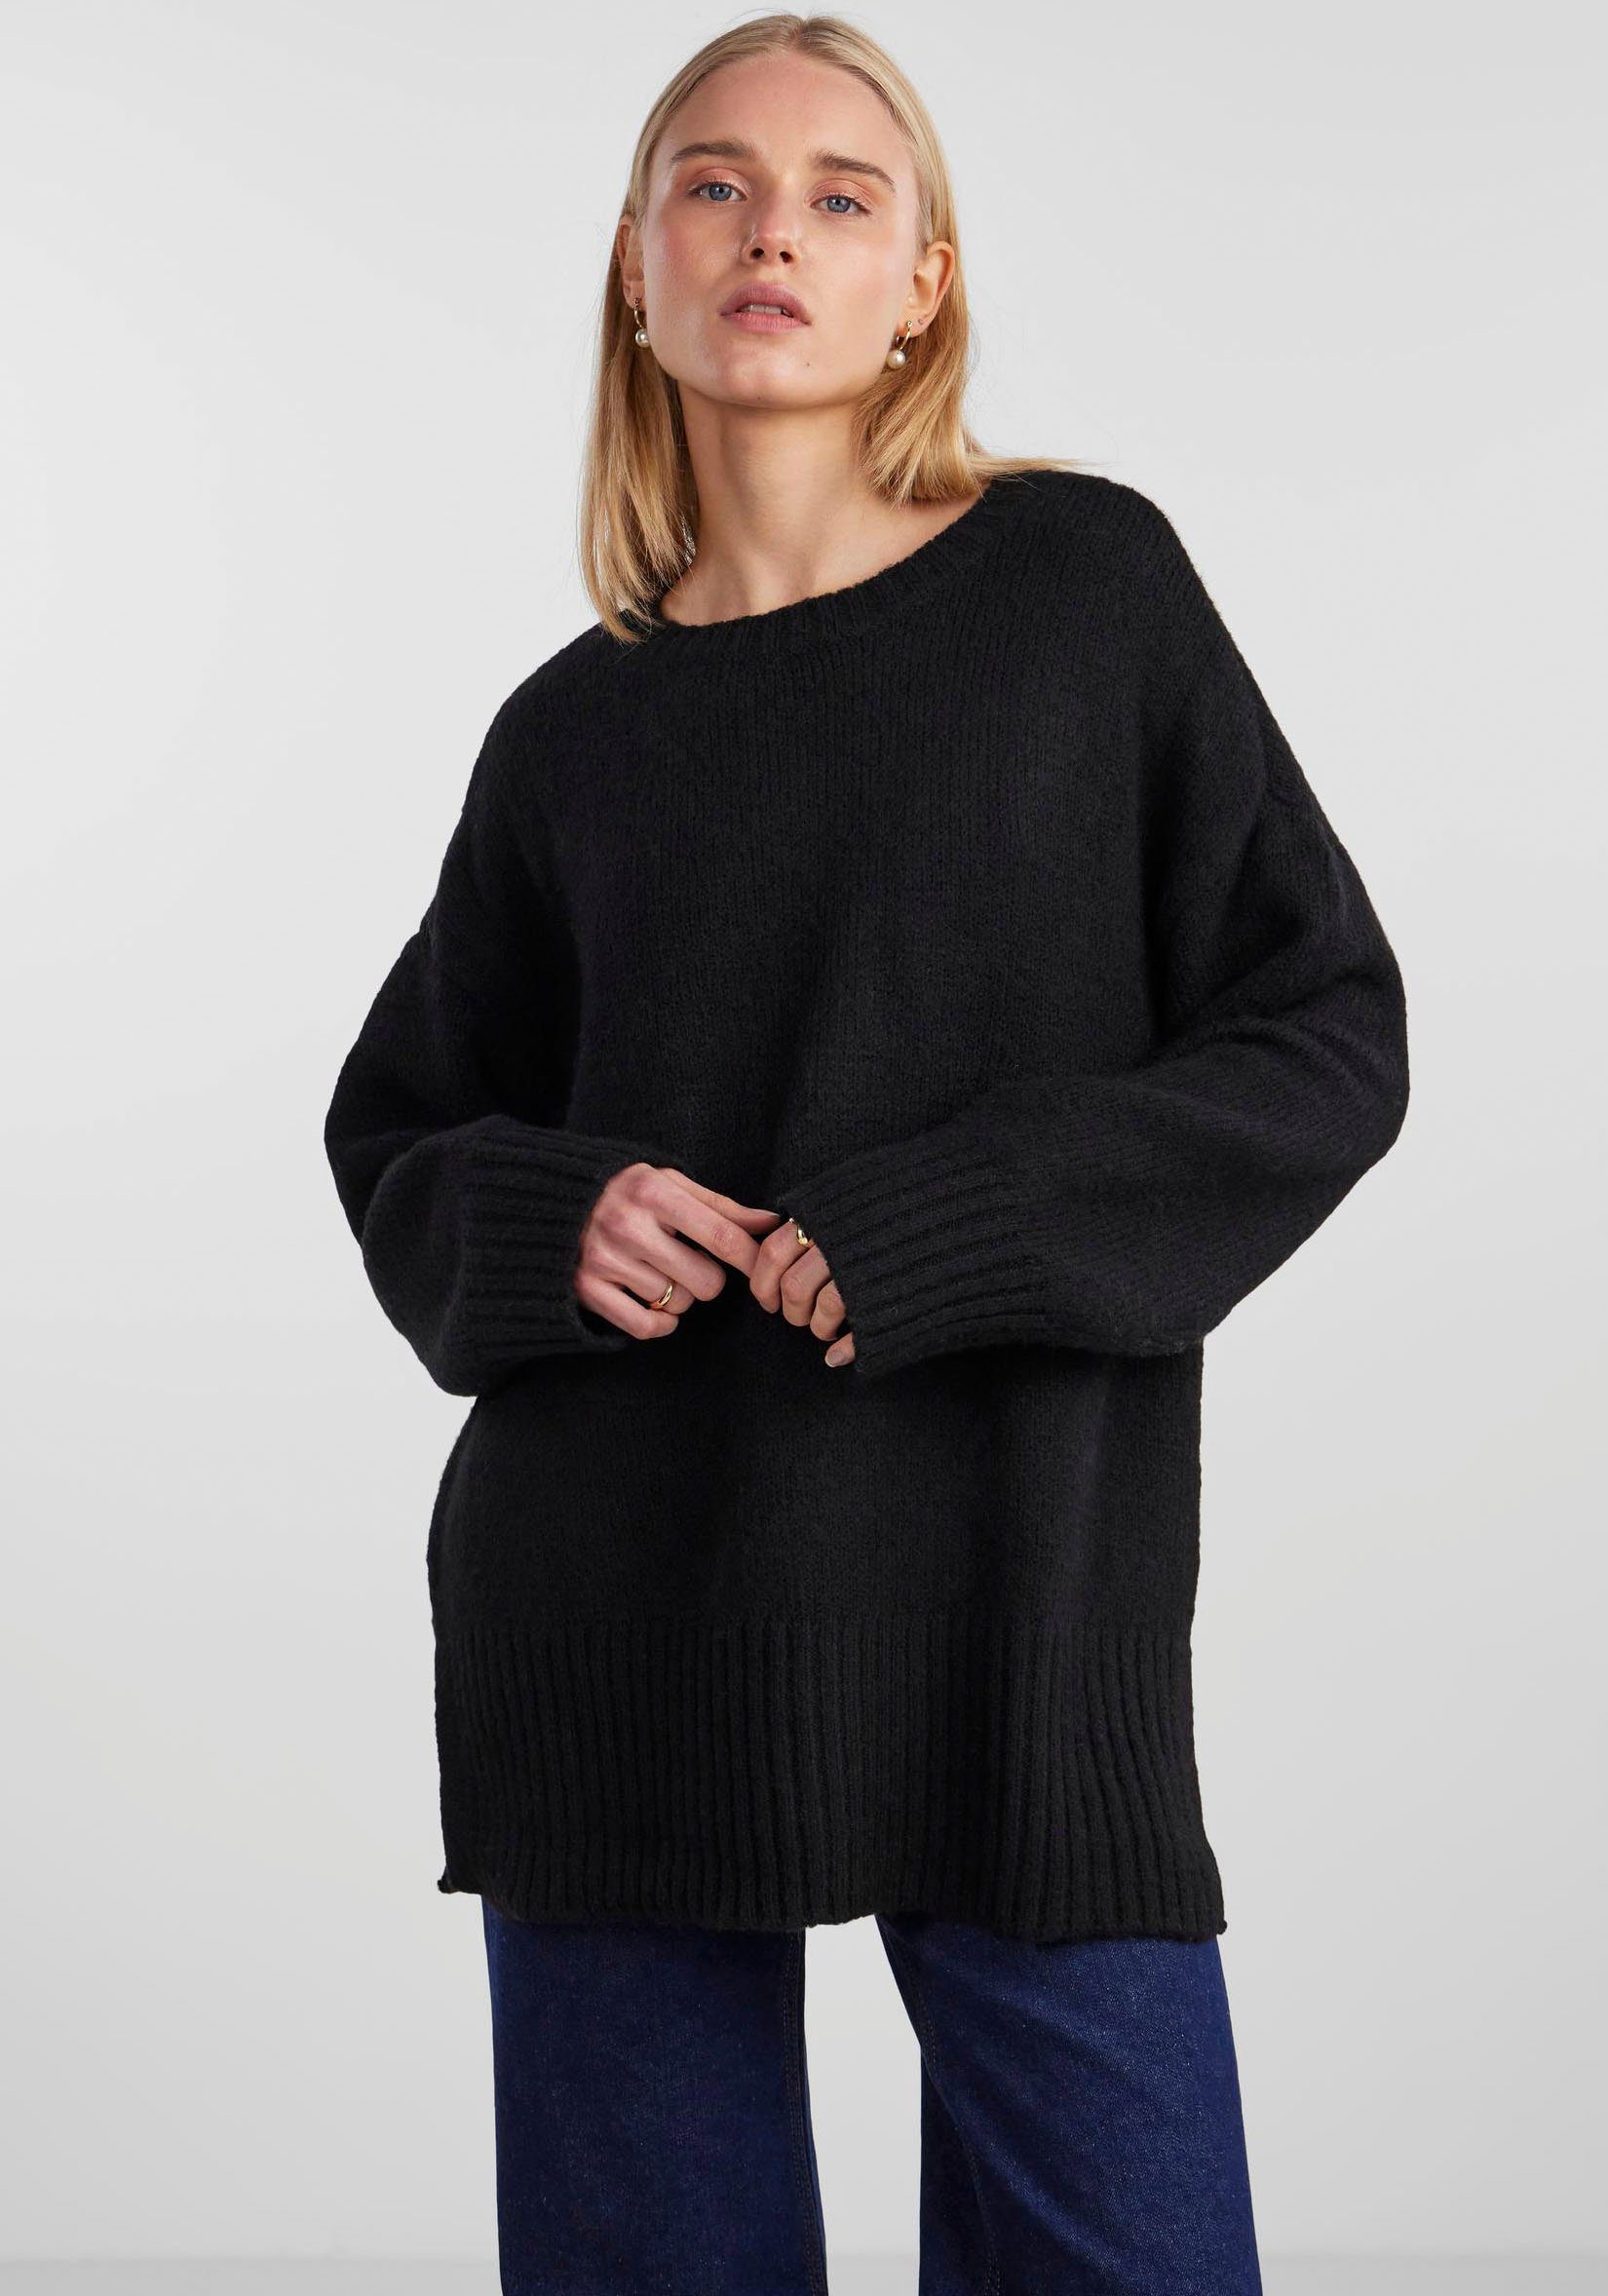 pieces Rundhalspullover PCNANCY LS LOOSE O-NECK KNIT NOOS BC Oversized